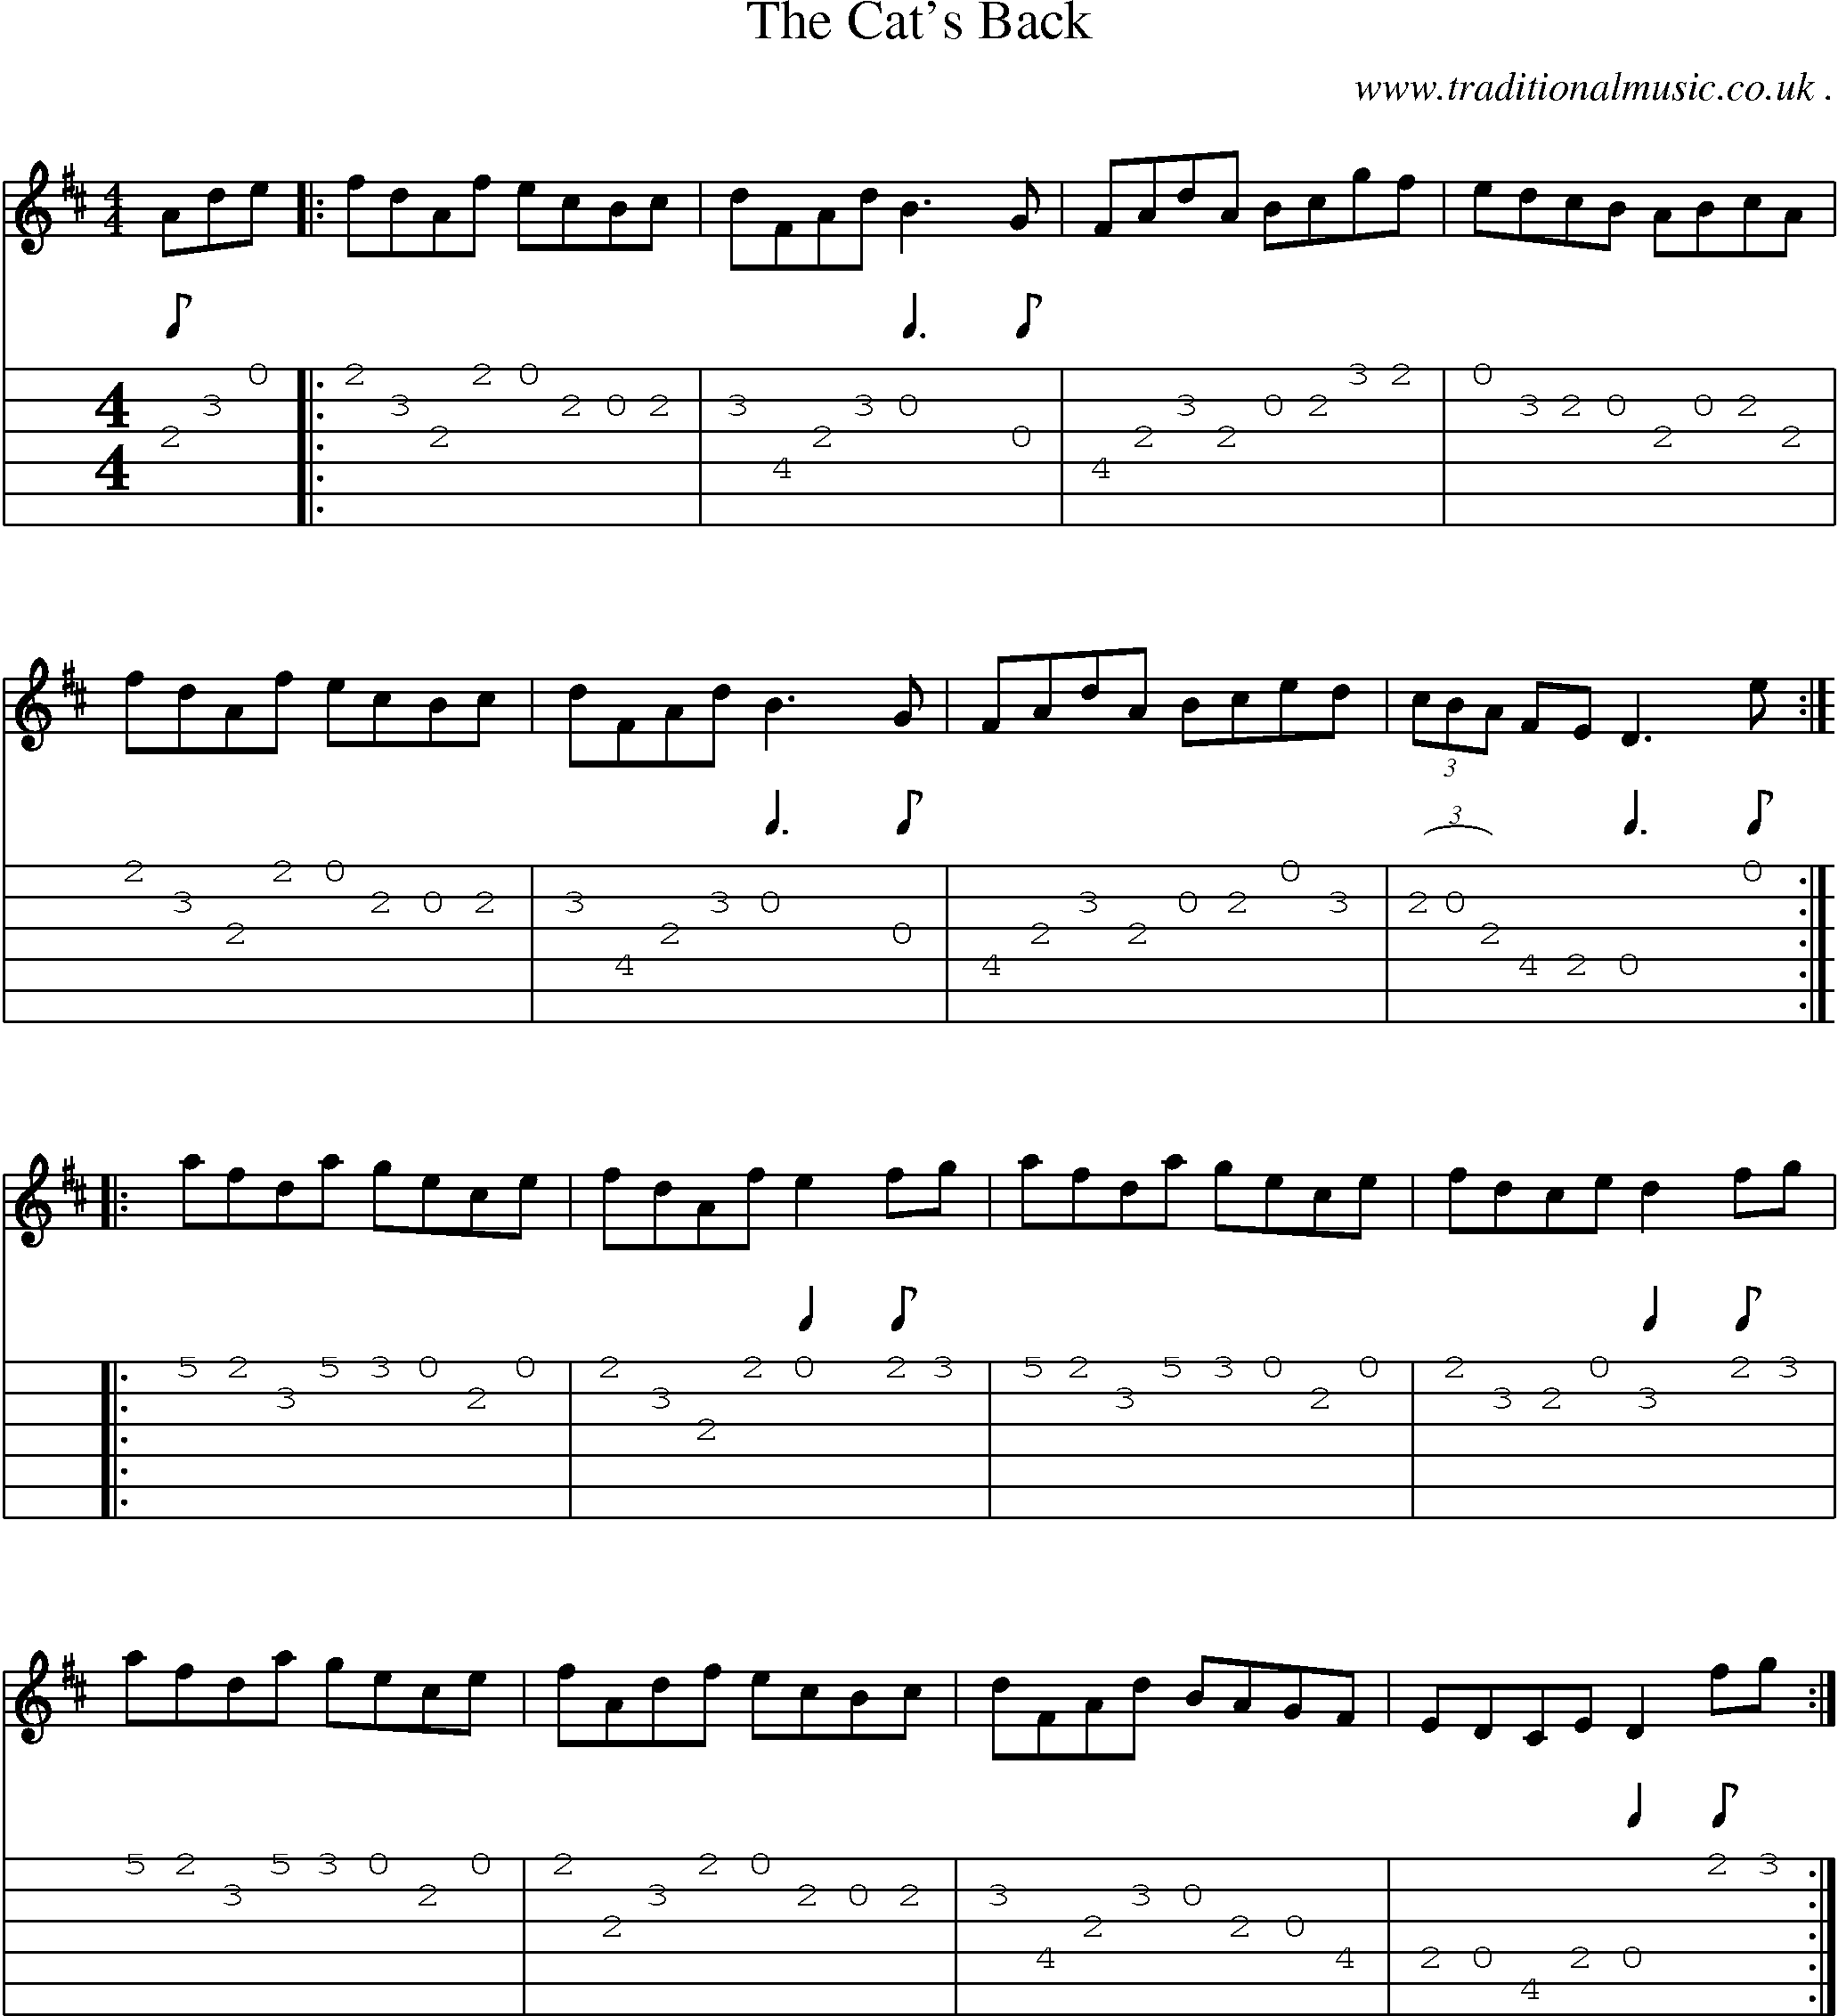 Sheet-Music and Guitar Tabs for The Cats Back